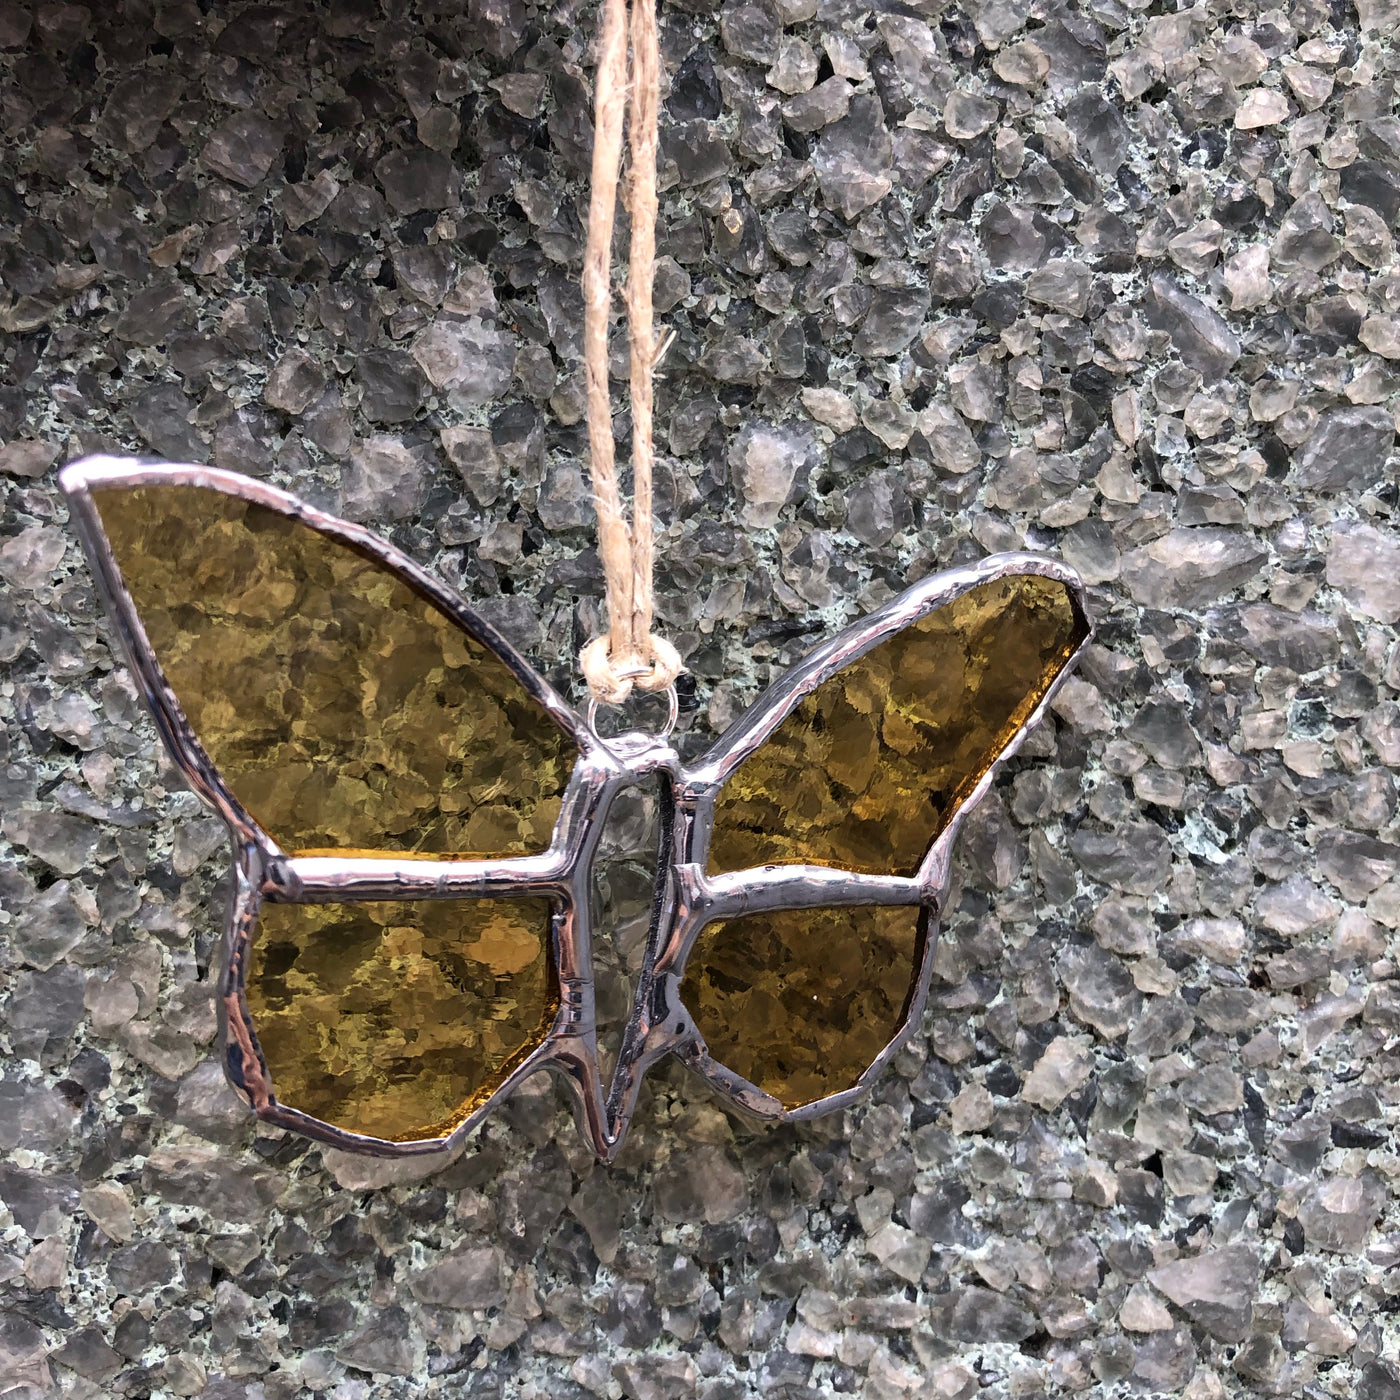 Stained Glass Butterfly Sun-catcher